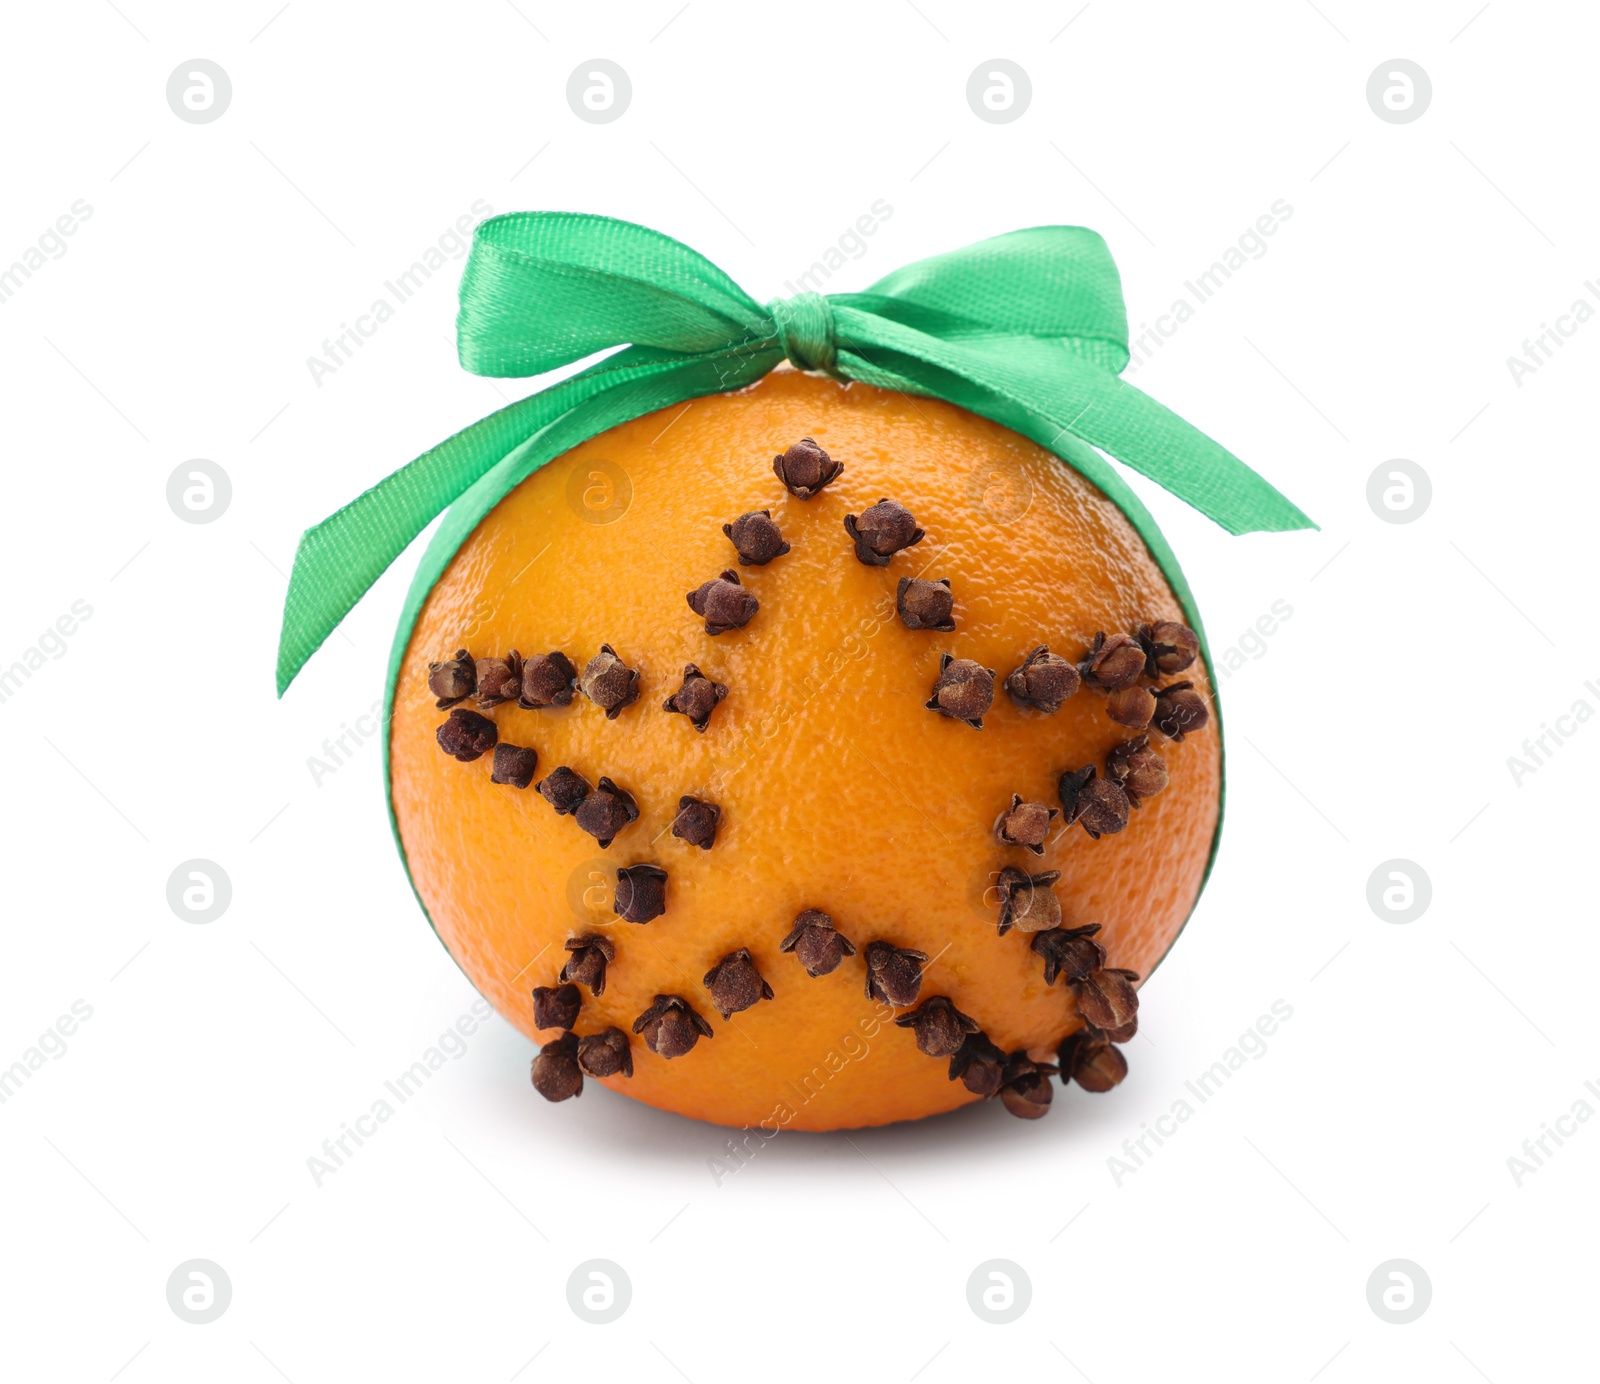 Photo of Pomander ball with green ribbon made of fresh tangerine and cloves isolated on white